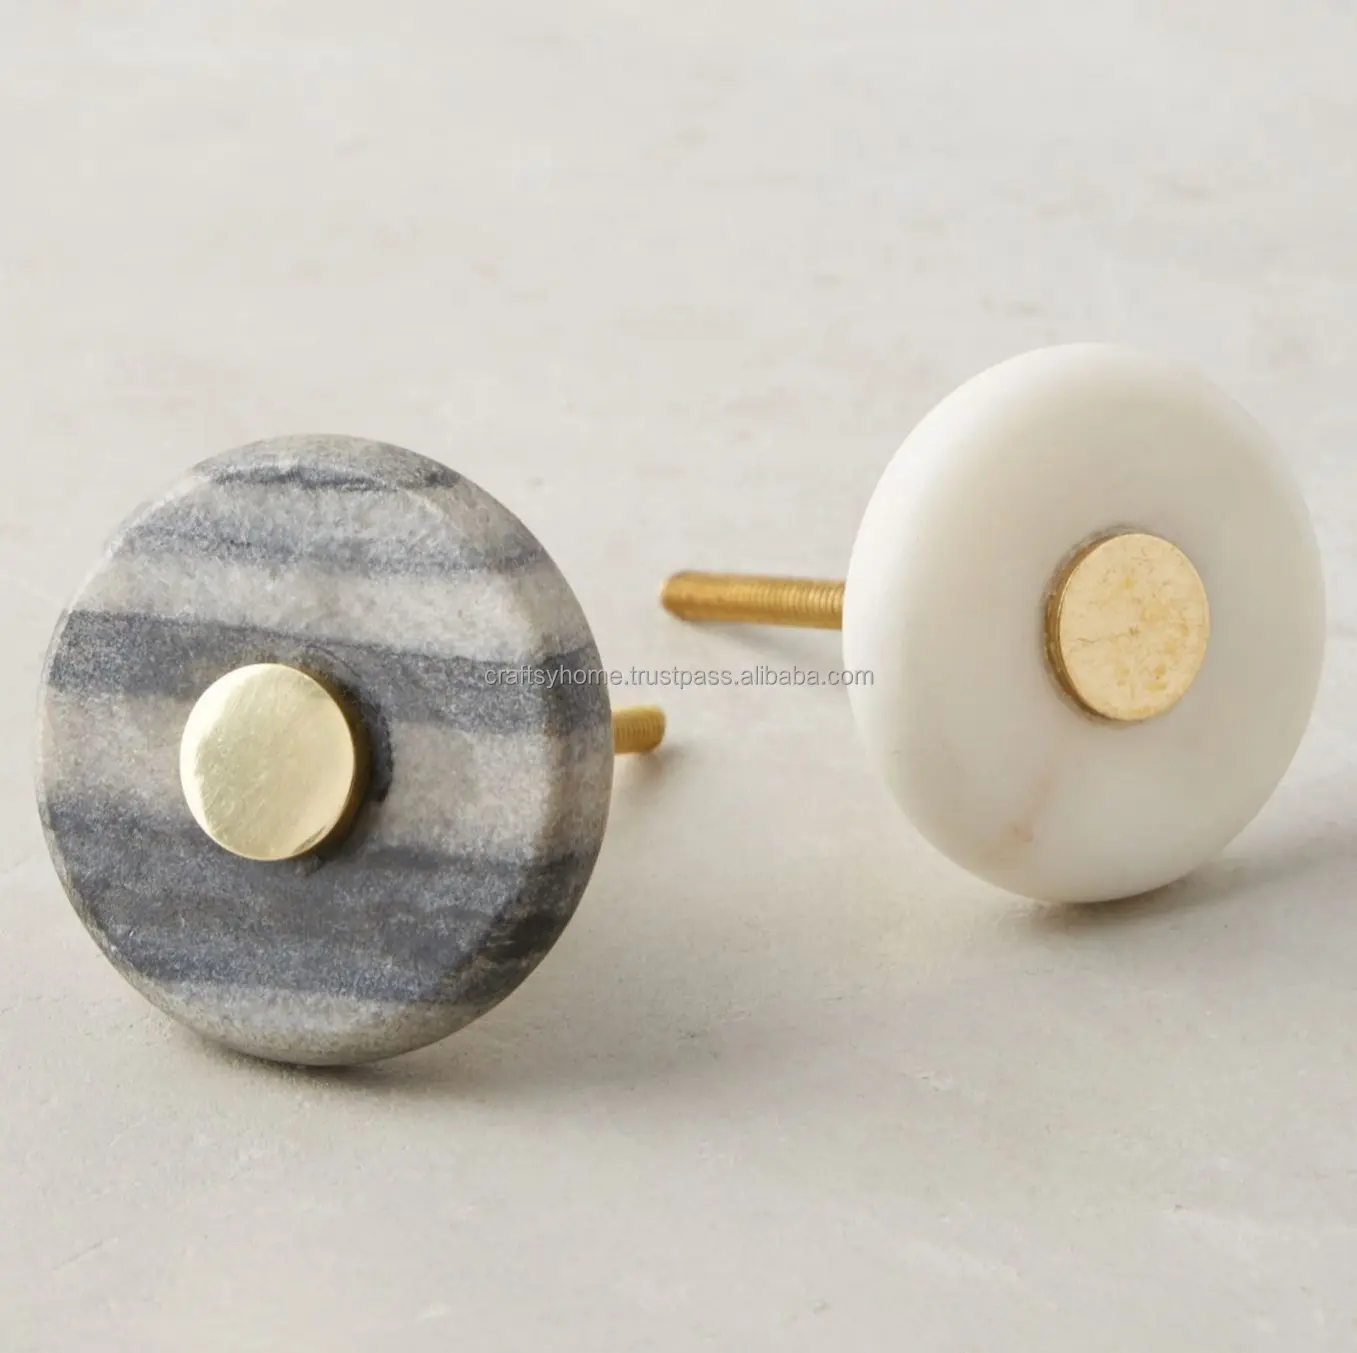 Natural Marble and Solid Brass Drawer Knob Handles for Cabinets and Drawers Furniture Handles Kitchen Cabinet Knob Wardrobe Pull